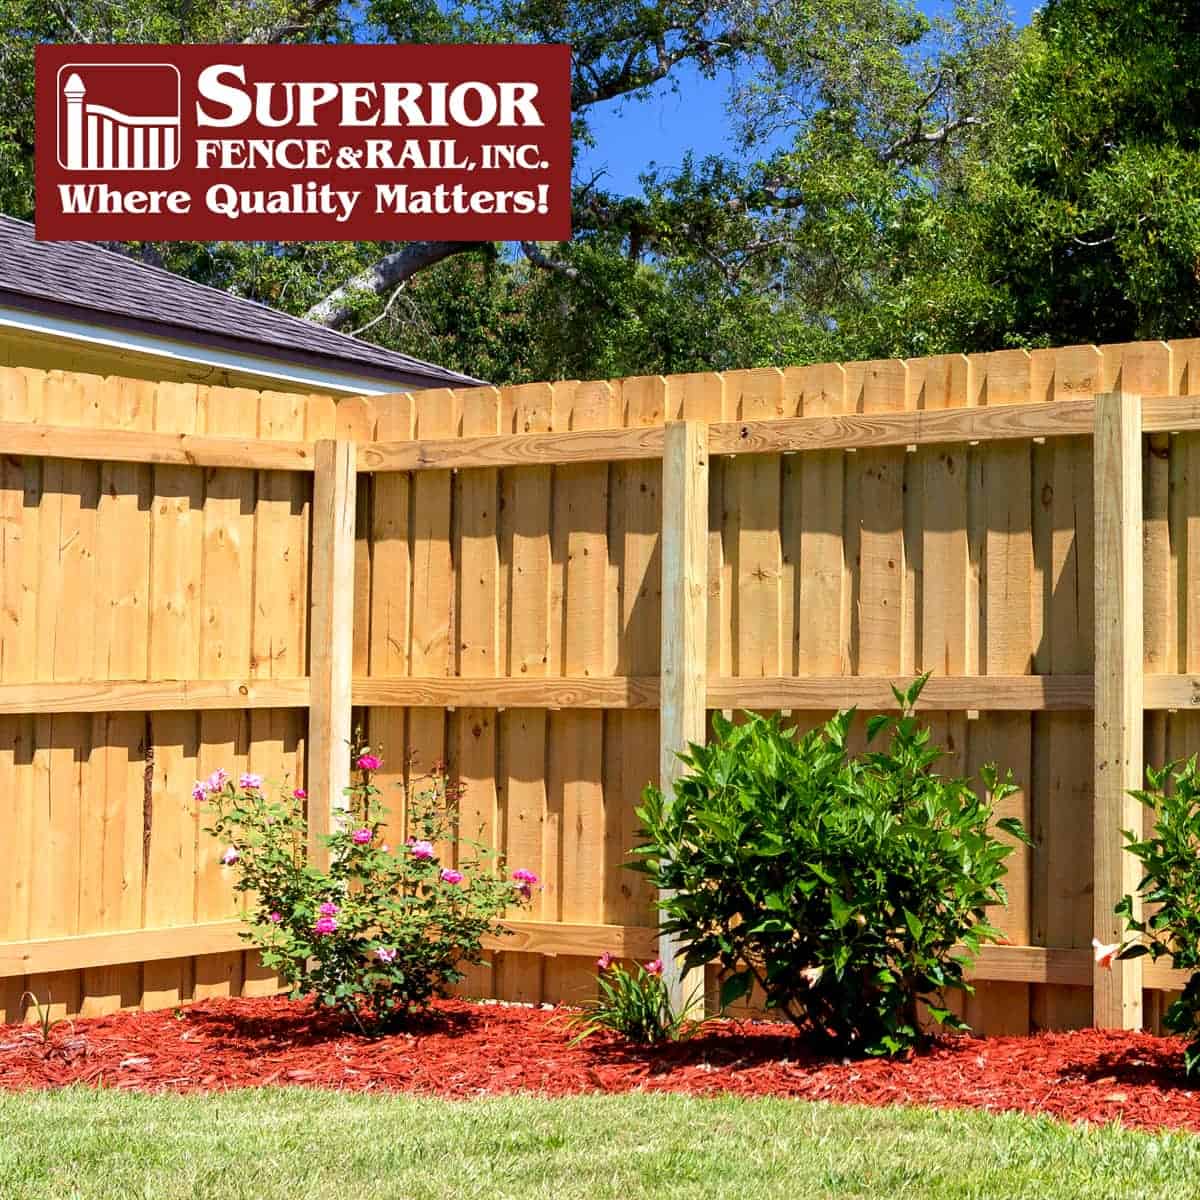 https://www.superiorfenceandrail.com/wp-content/uploads/2022/05/Mason-Fence-Company-Contractor.jpg